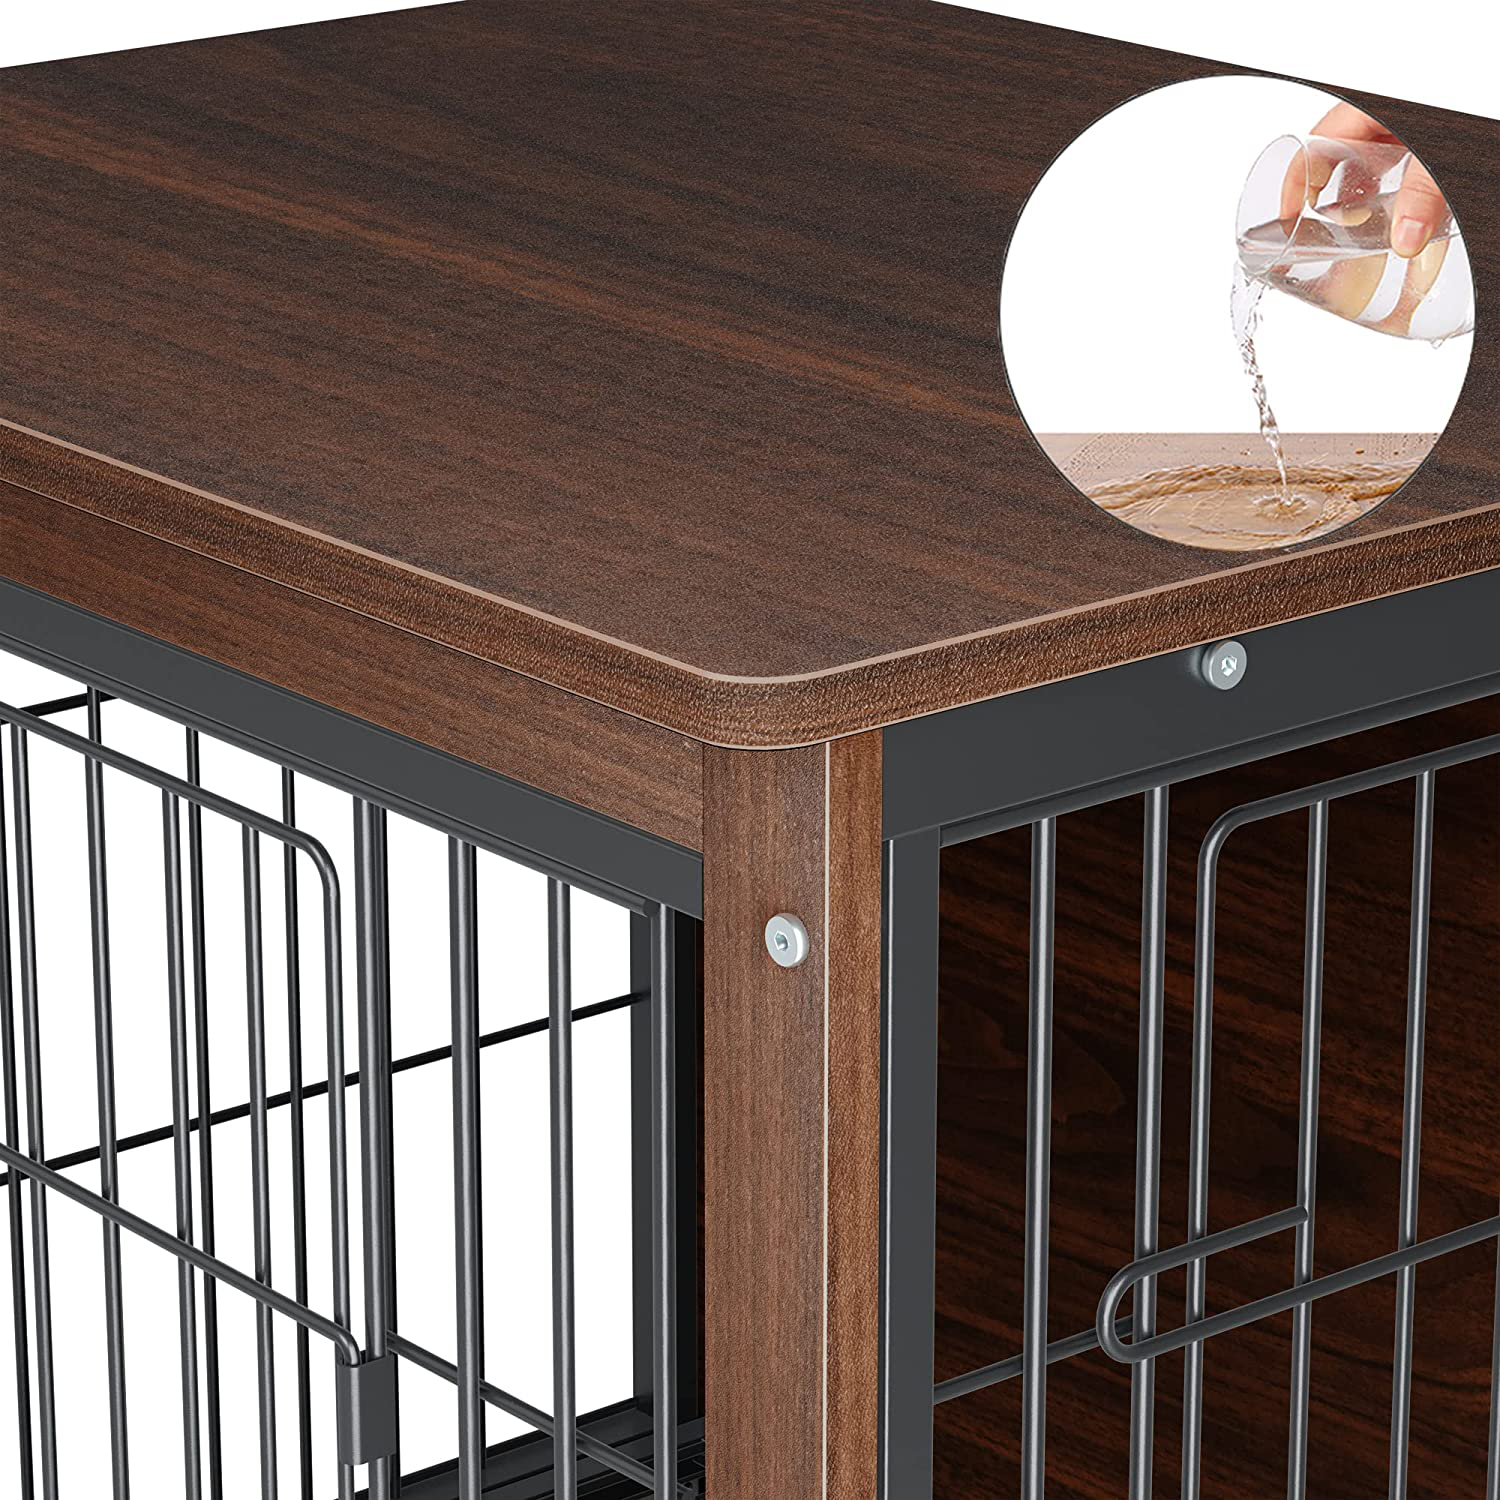 End Table Dog Crate with Double Door,Wooden Pet Kennel with Floor Tray, Furniture Style Indoor Dog House for Small Medium Dogs Animals & Pet Supplies > Pet Supplies > Dog Supplies > Dog Houses Generic   